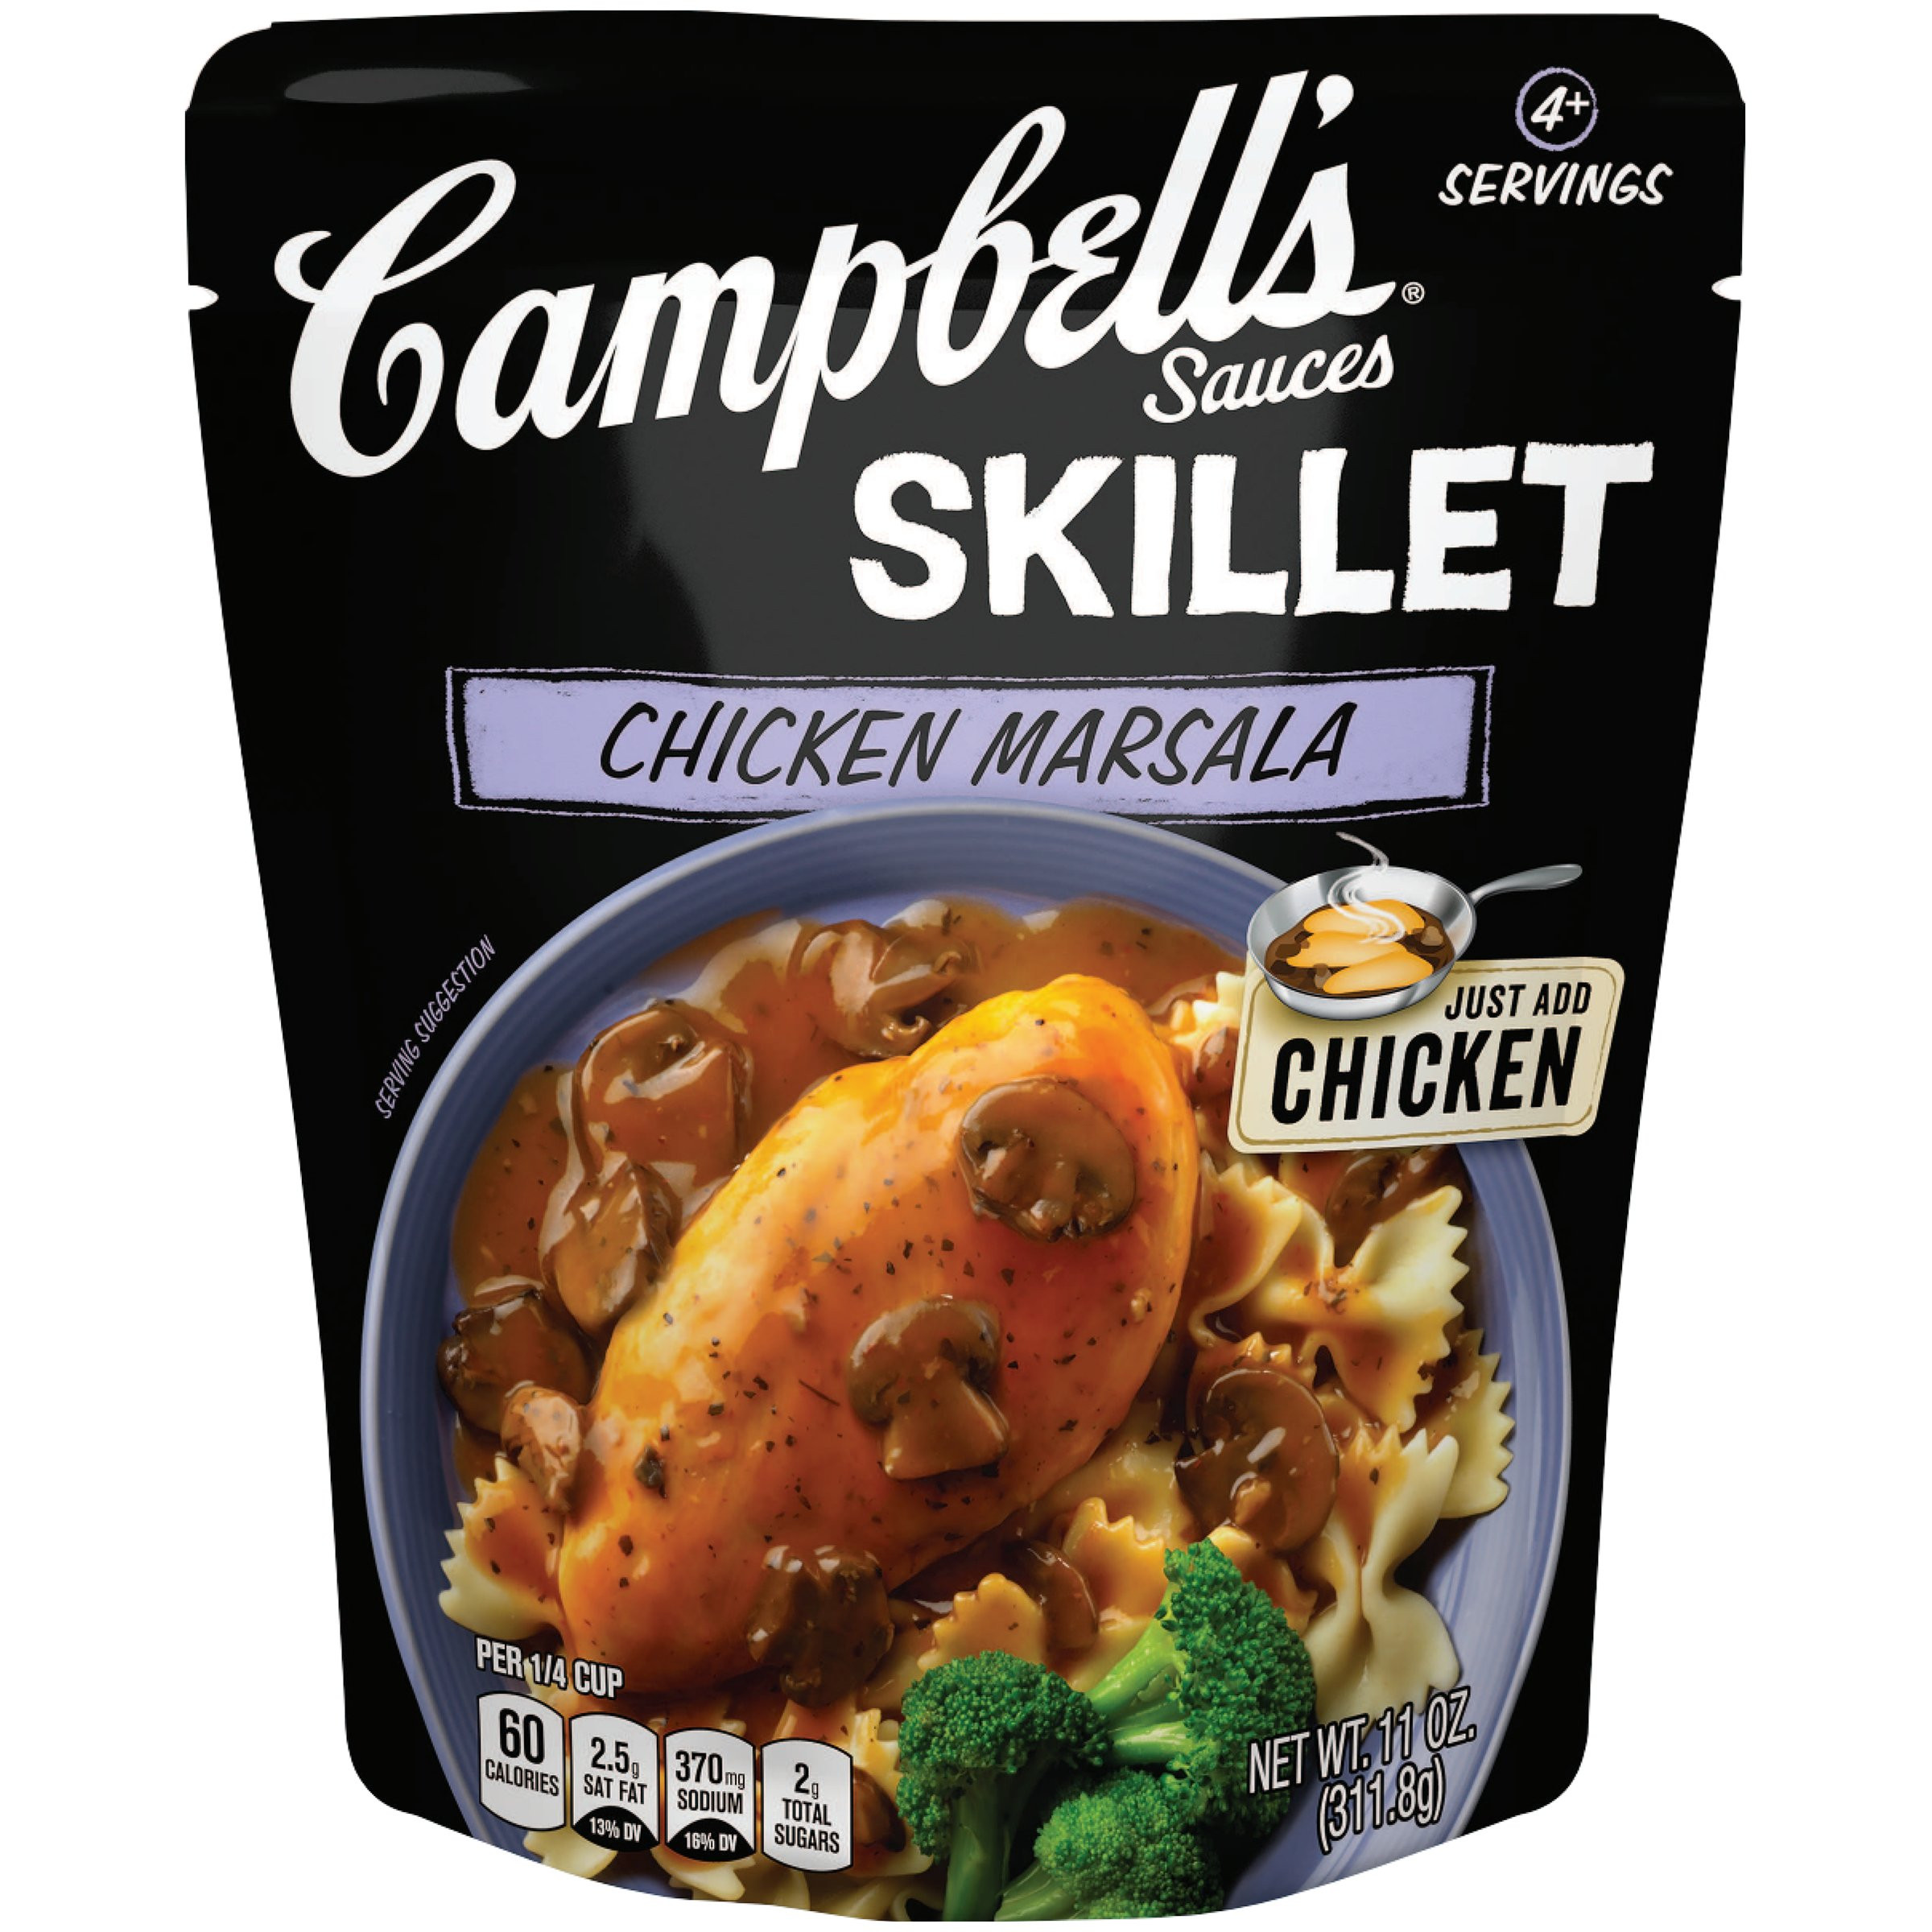 Campbells Crockpot Sauces
 Amazon Campbell s Slow Cooker Sauces Tavern Style